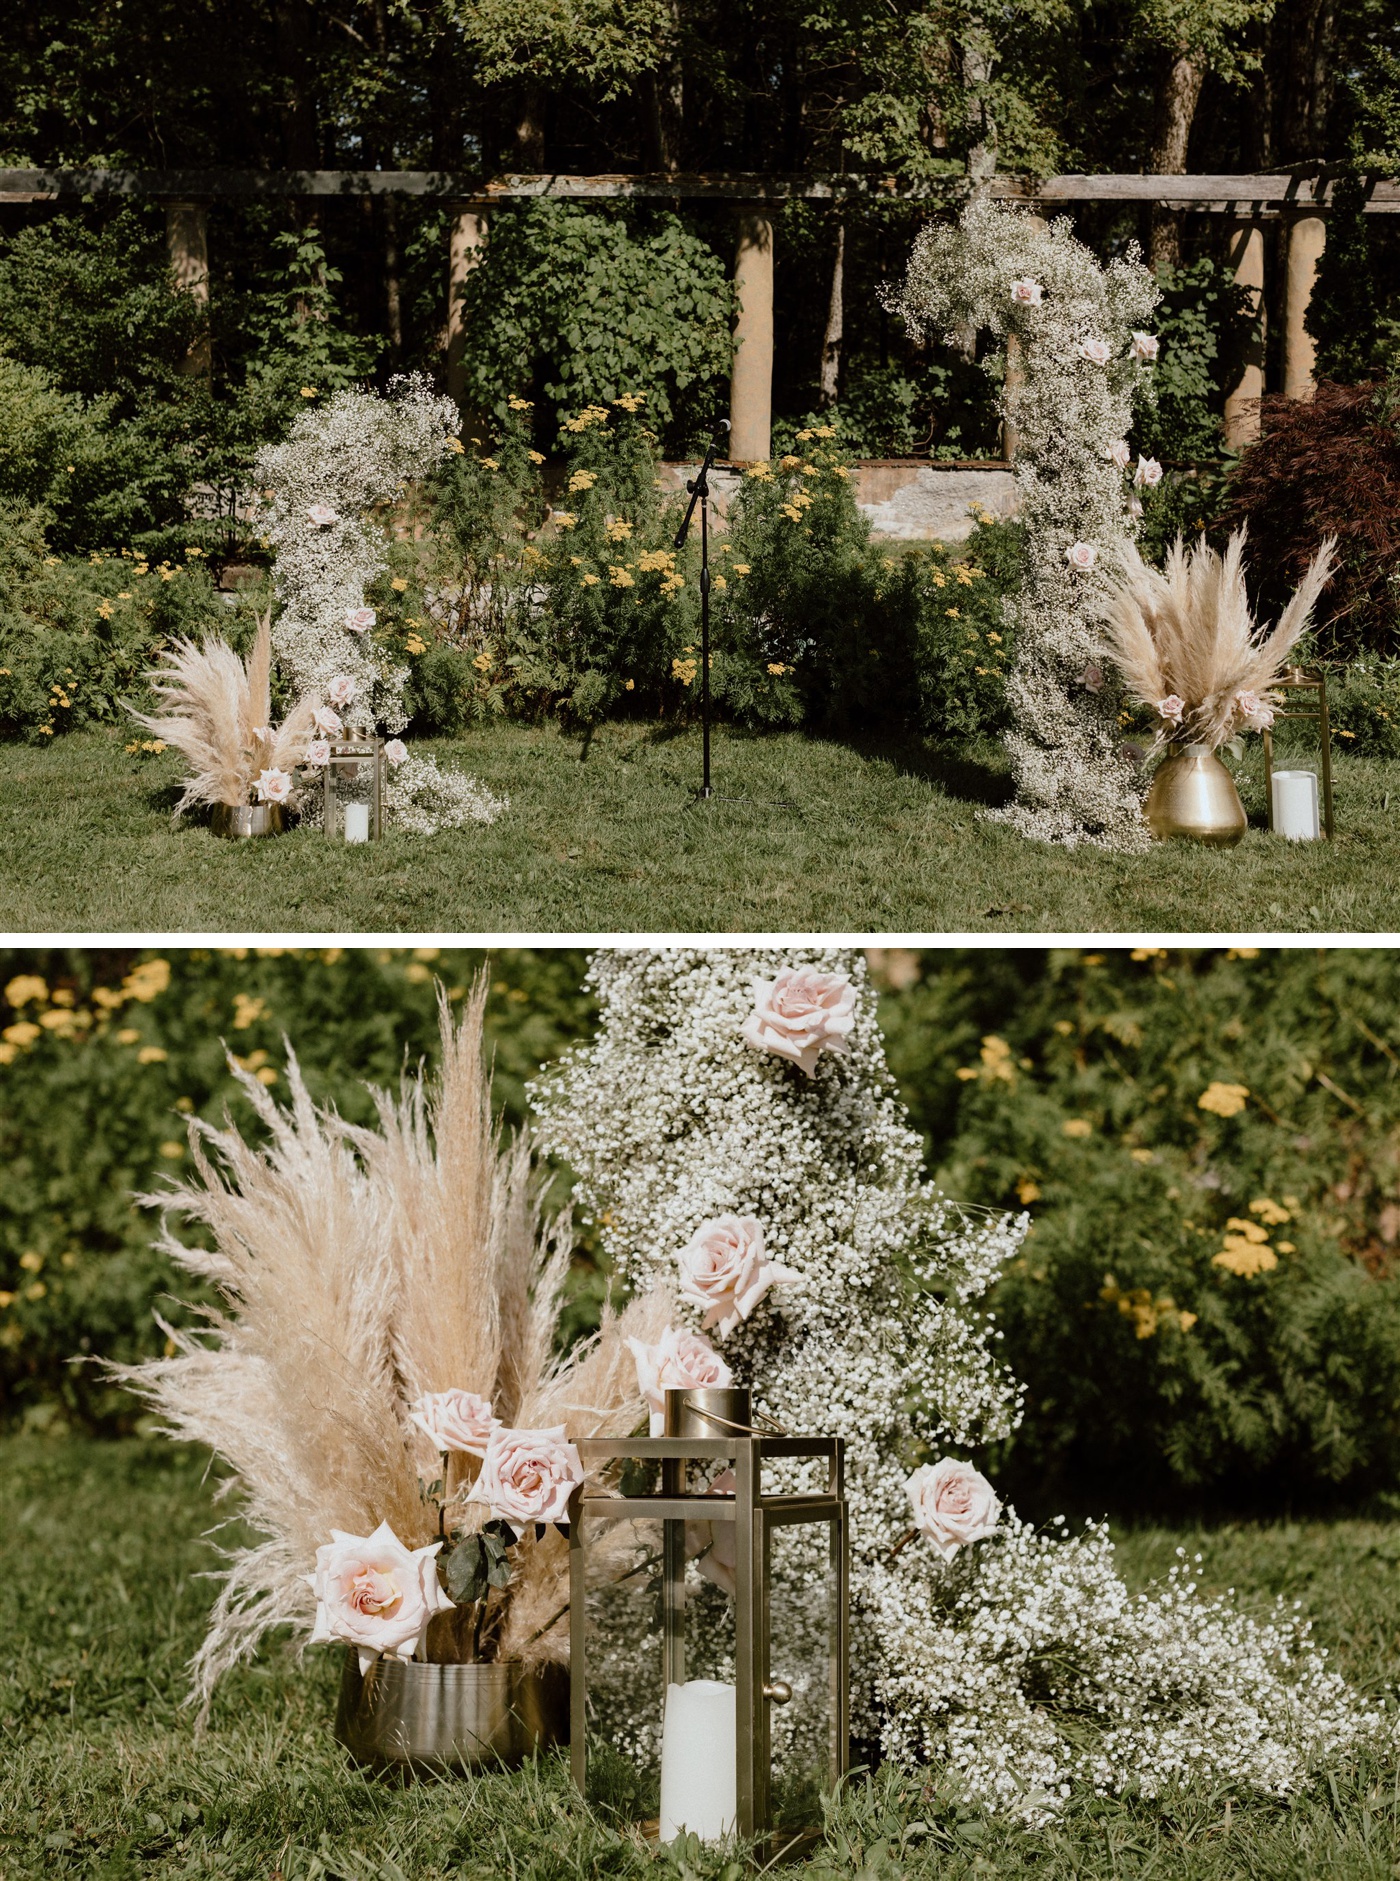 Ceremony arches featuring baby's breath and blush roses beside golden pots filled with pampas grass